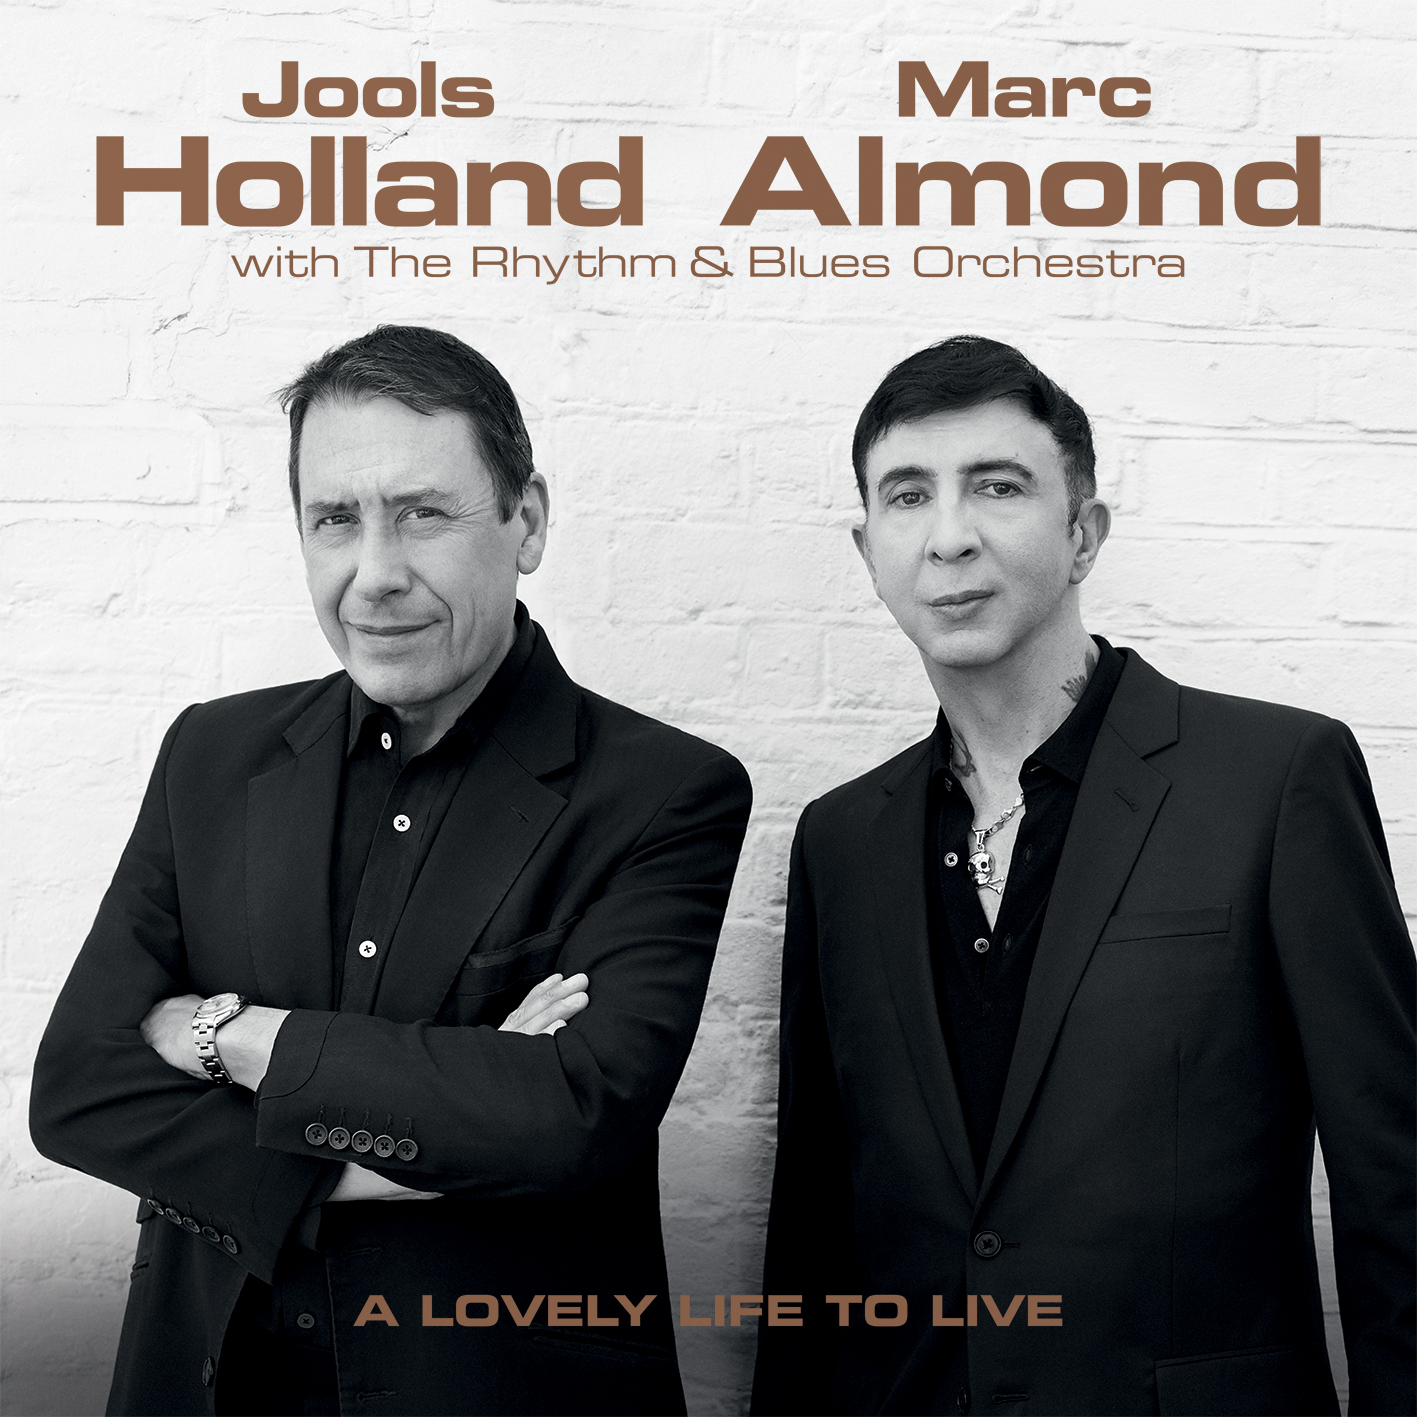 Jools Holland and Marc Almond's new album